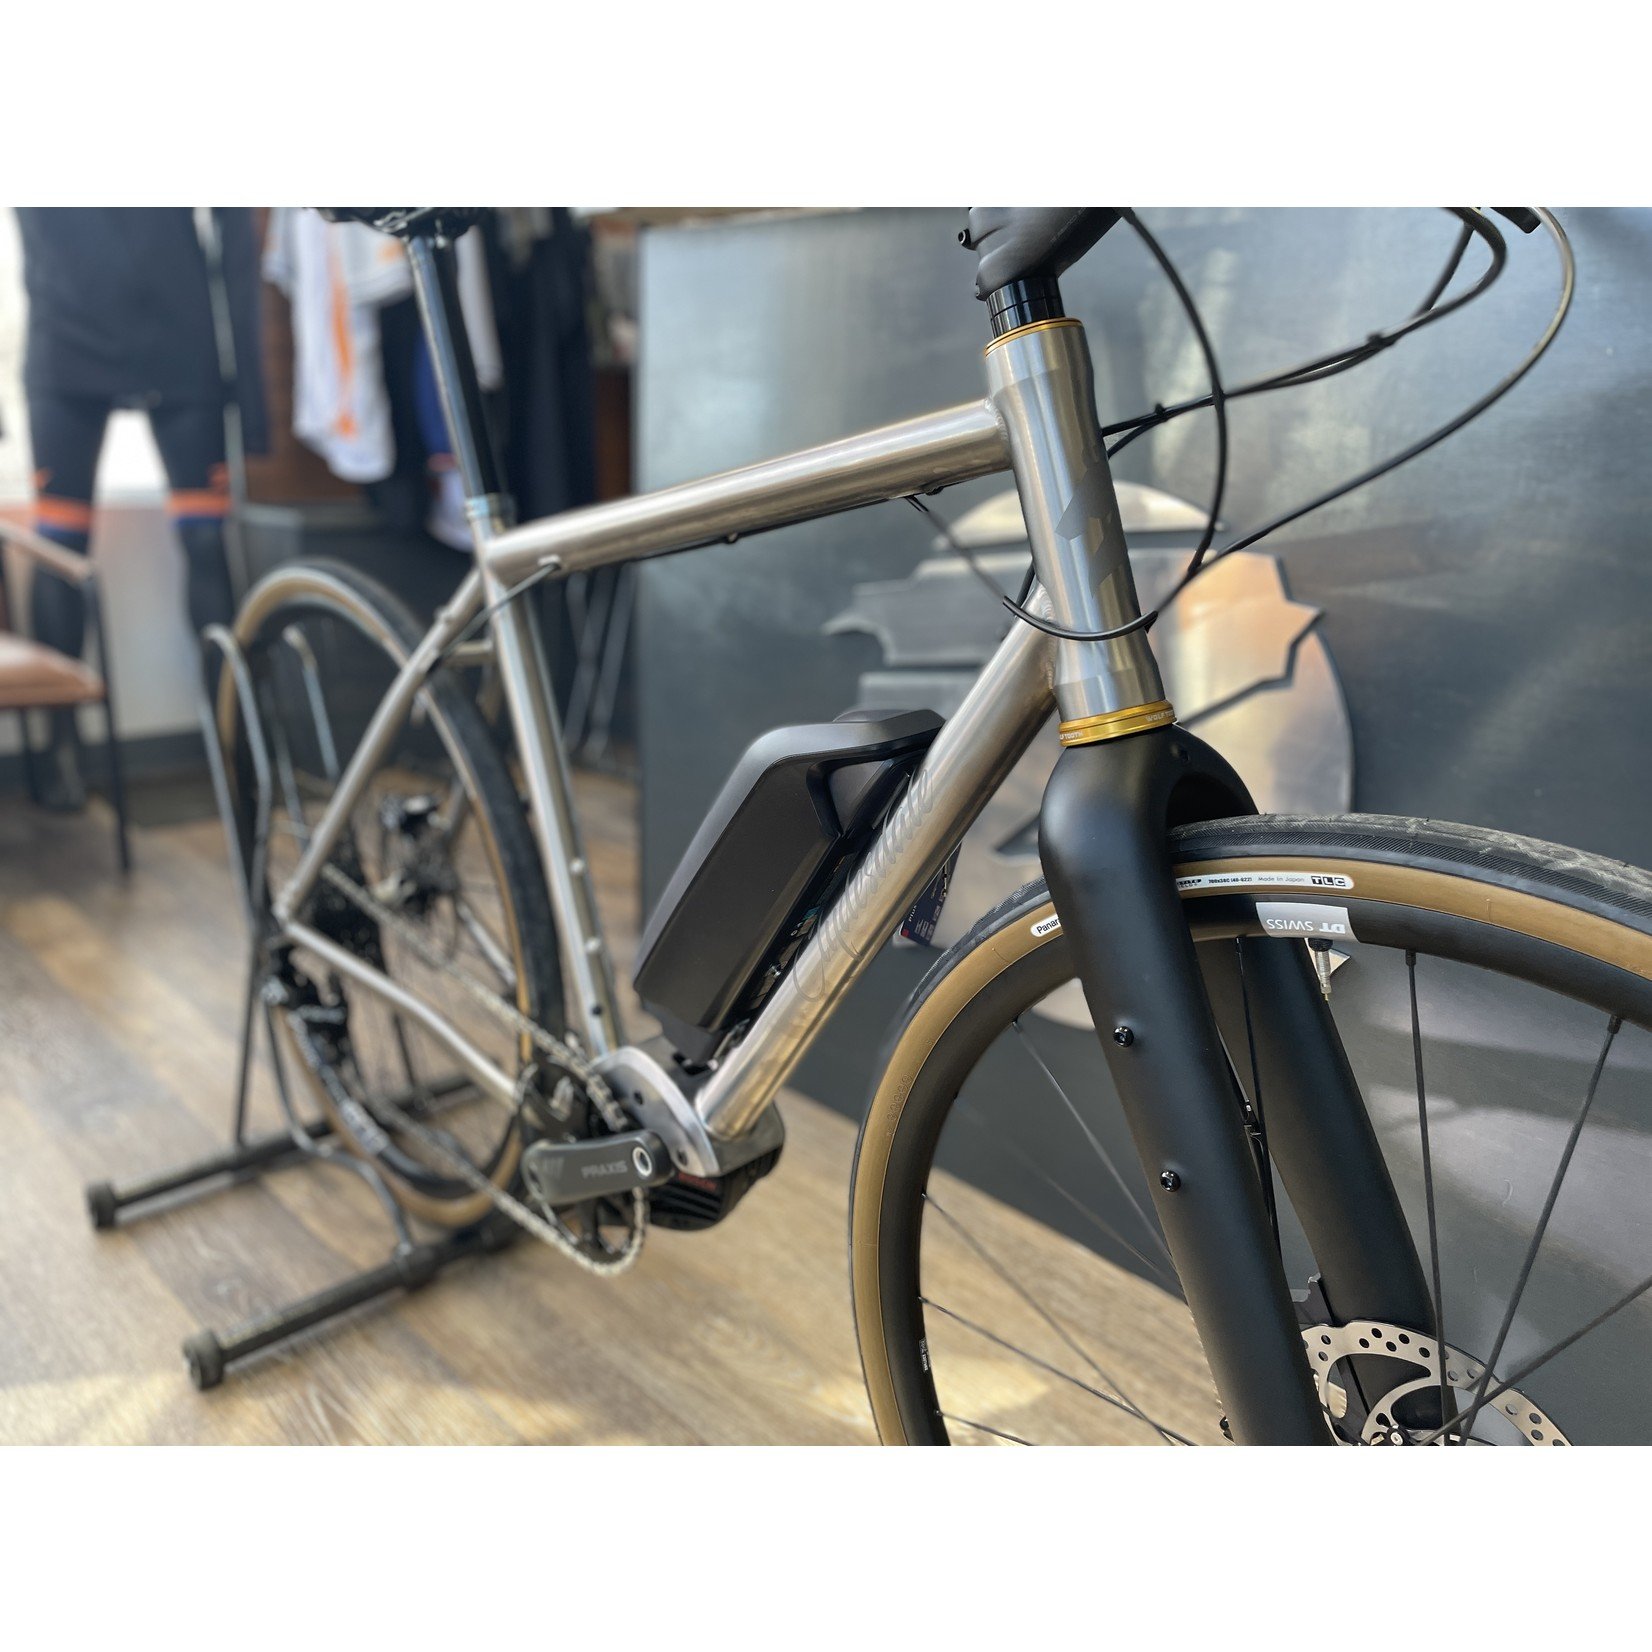 Clydesdale Clydesdale Whip - Titanium gravel/road/touring E-bike